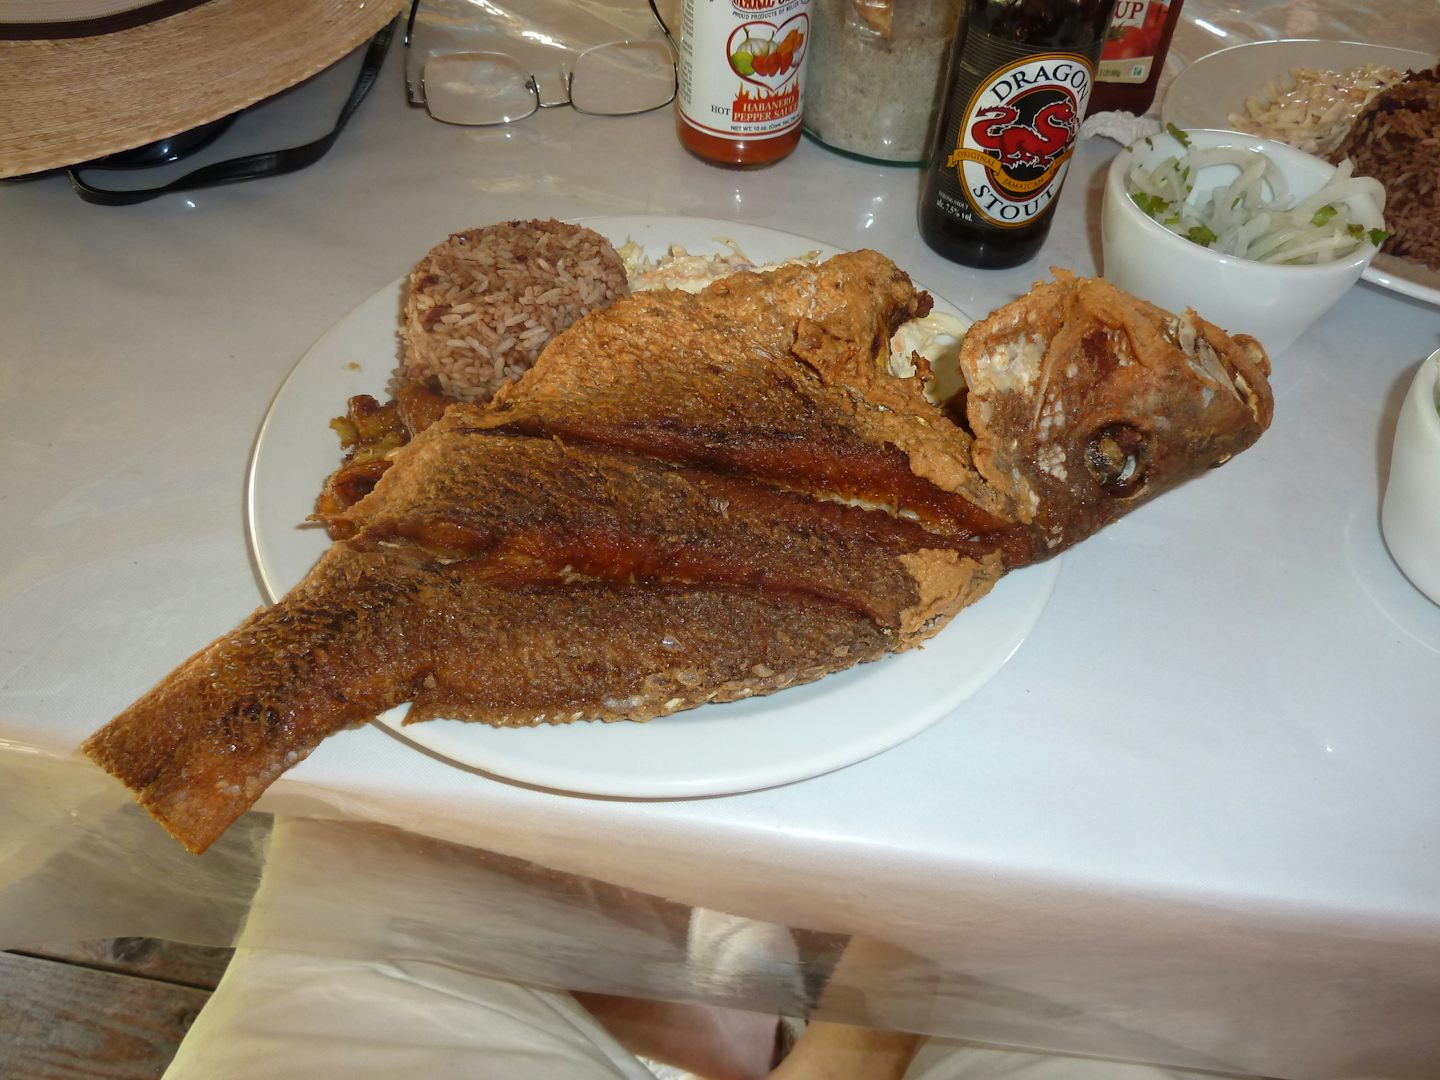 Whole snapper, prepared perfectly